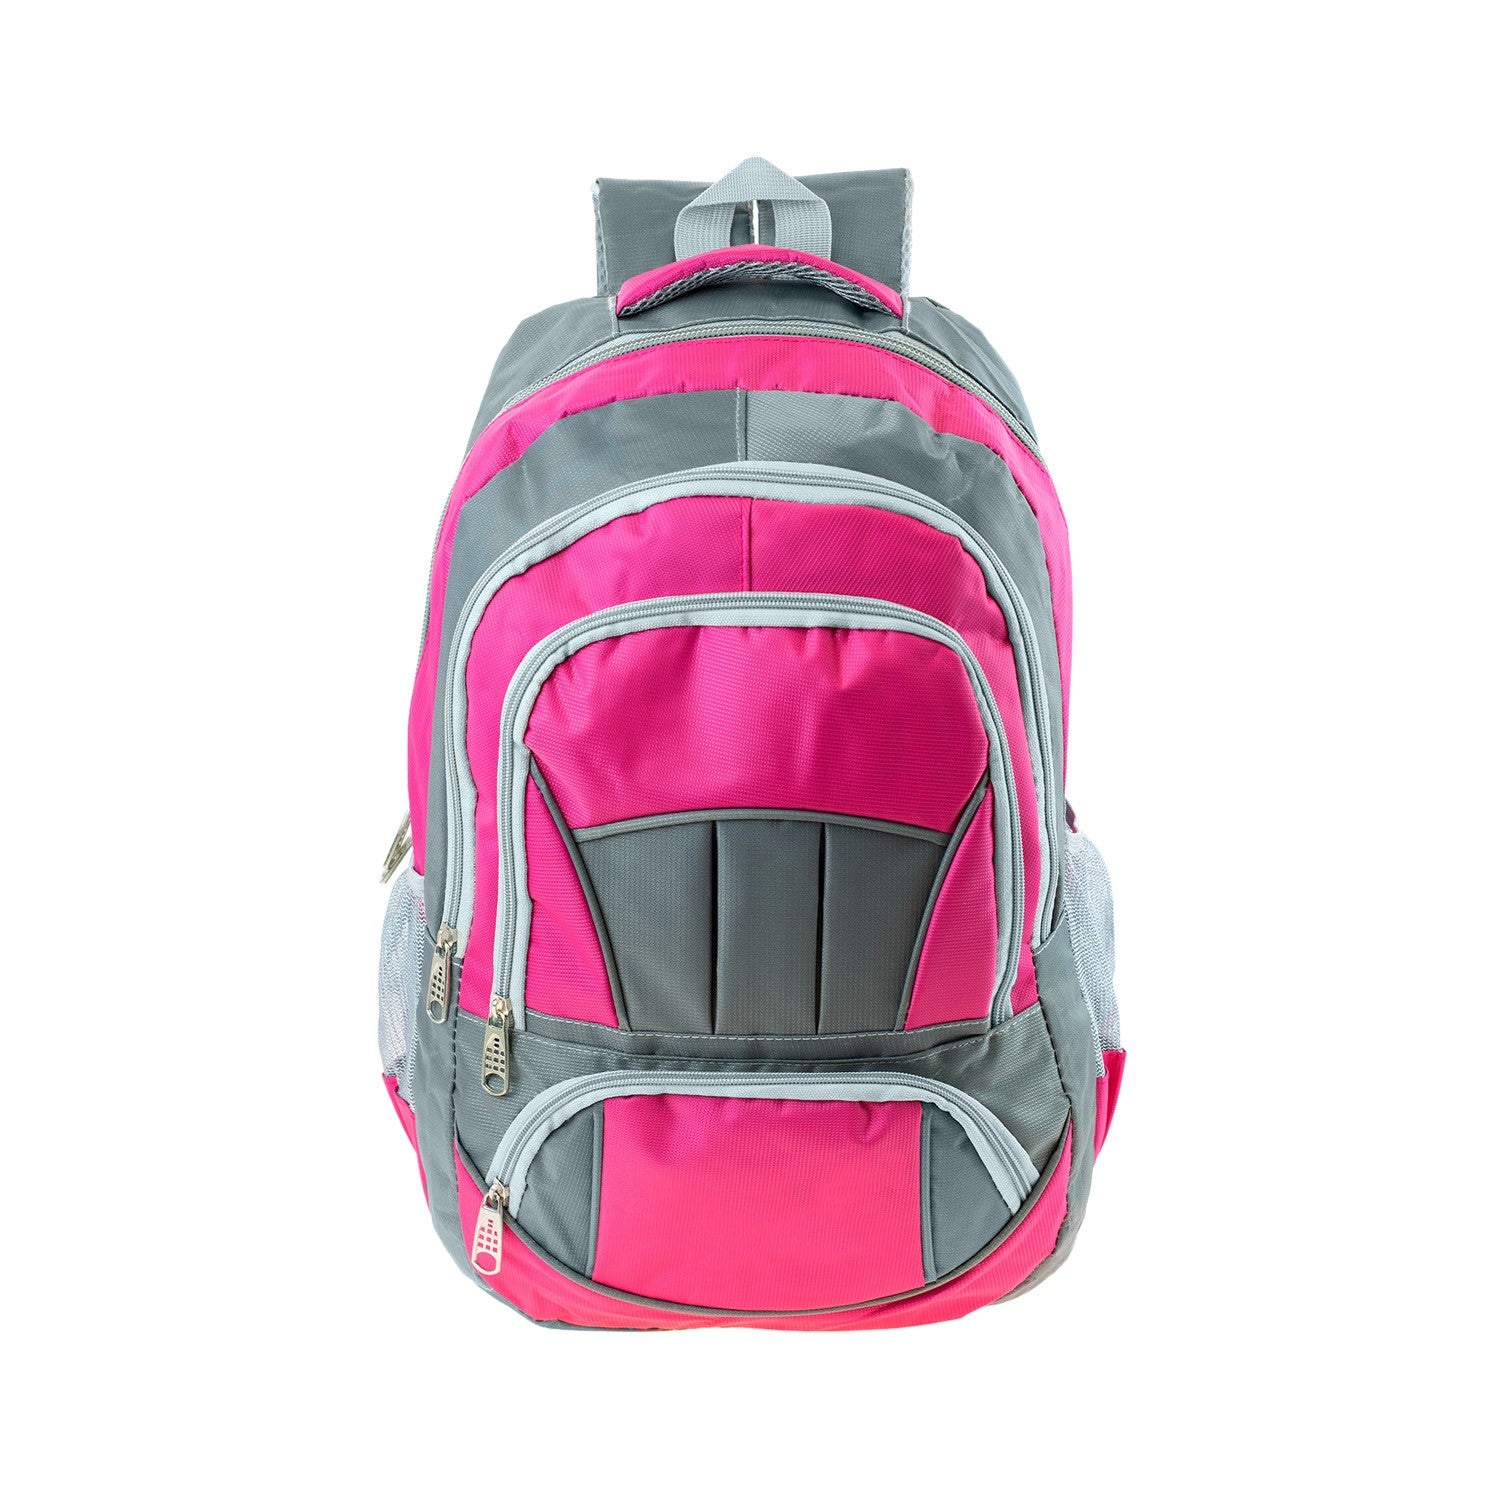 19" Durable Quality Premium Wholesale Backpack in 8 Assorted Colors - Bulk Case of 24